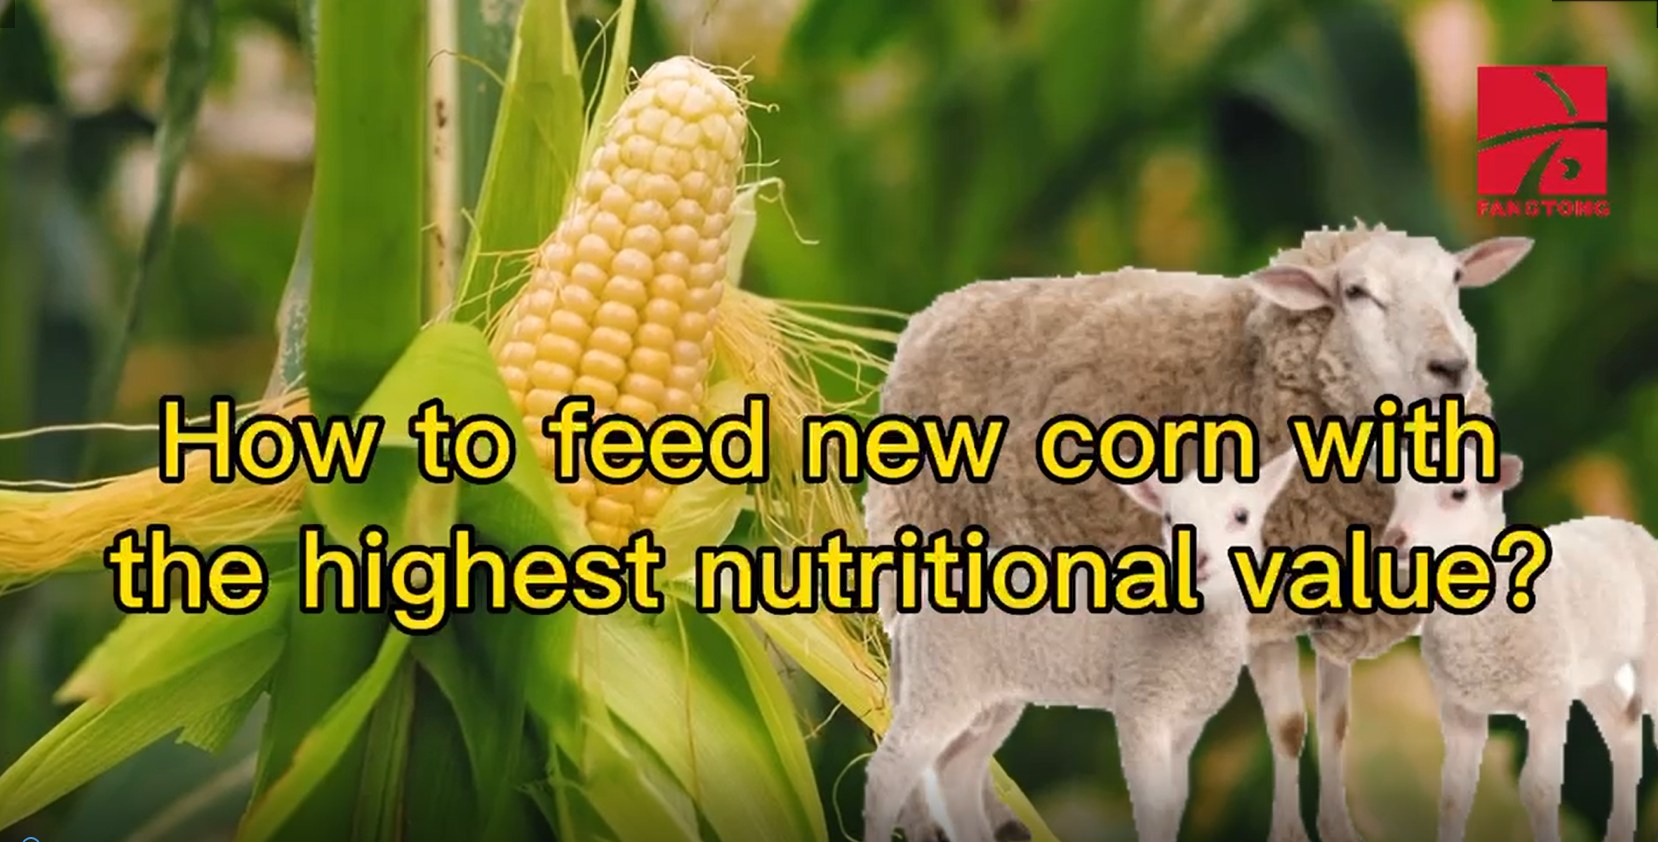 How to feed new corn with the highest nutritional value